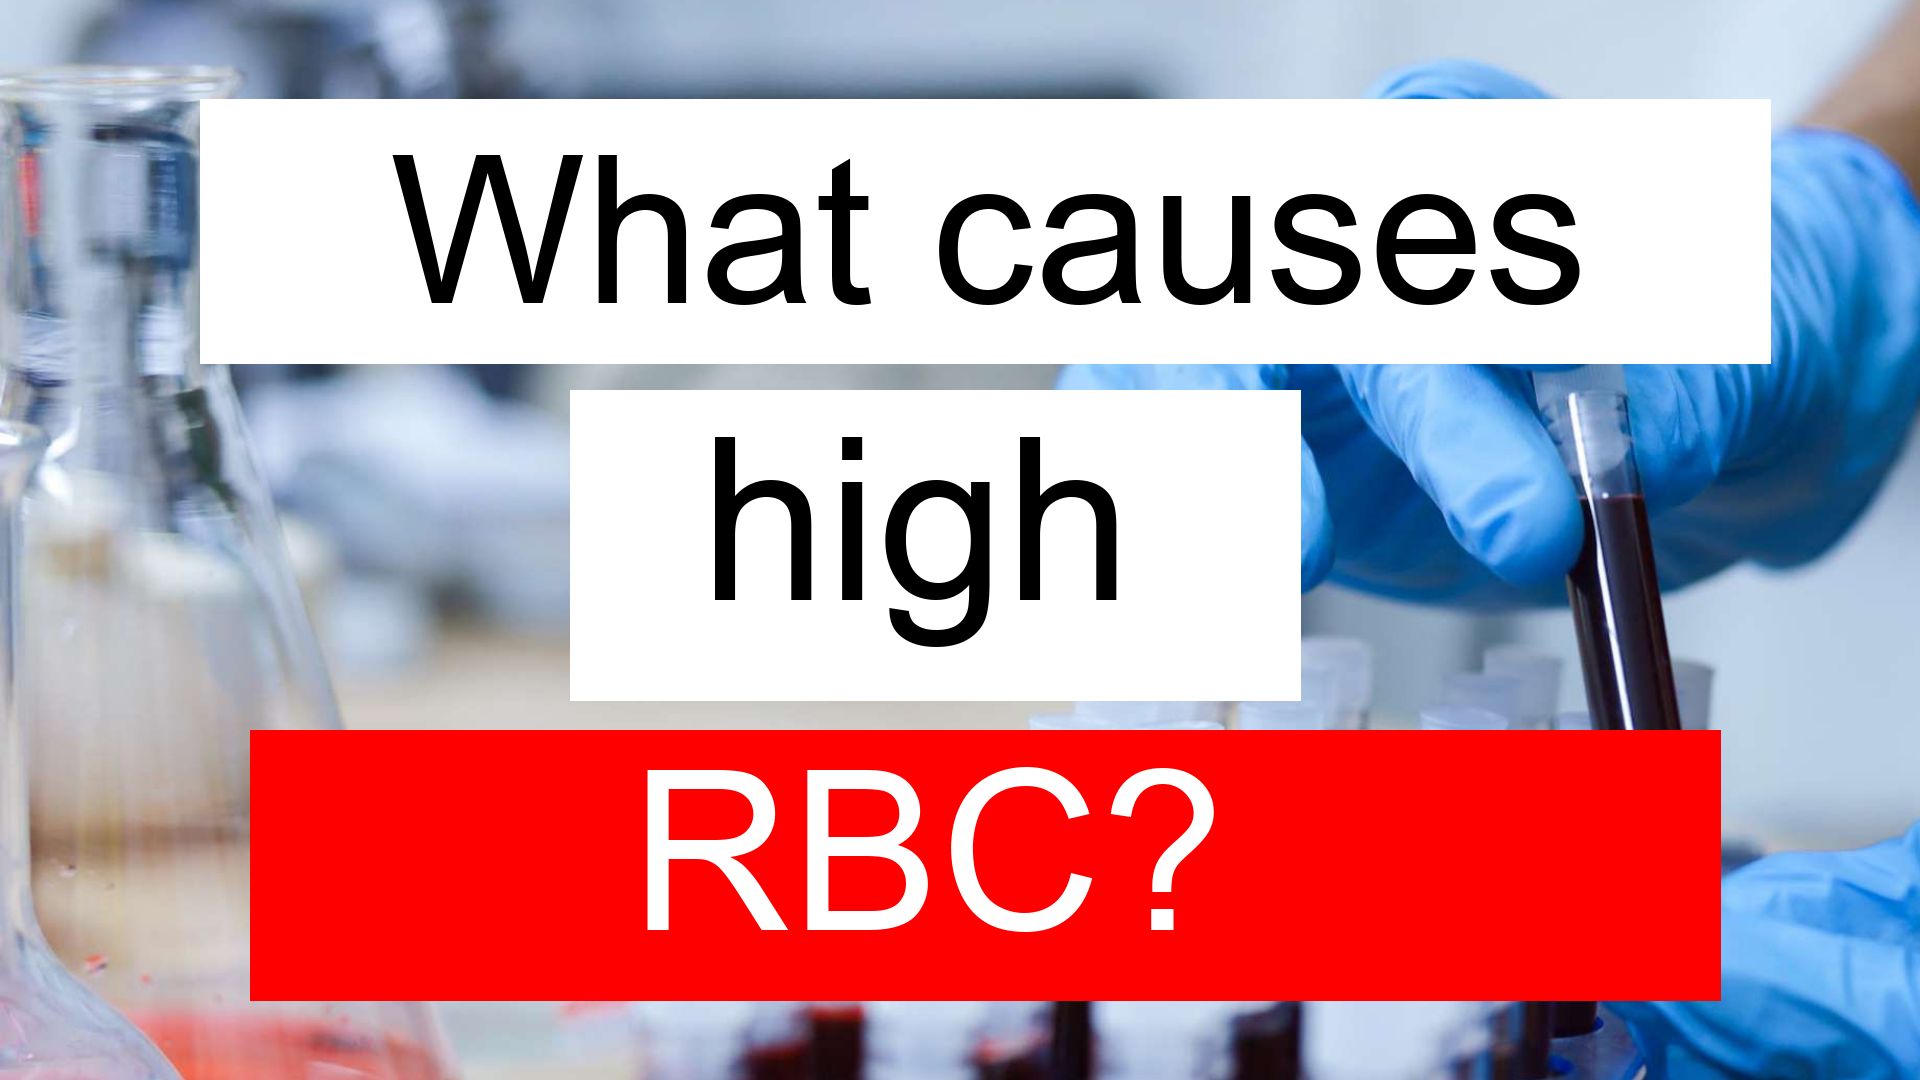 What causes high RBC and low MCH?